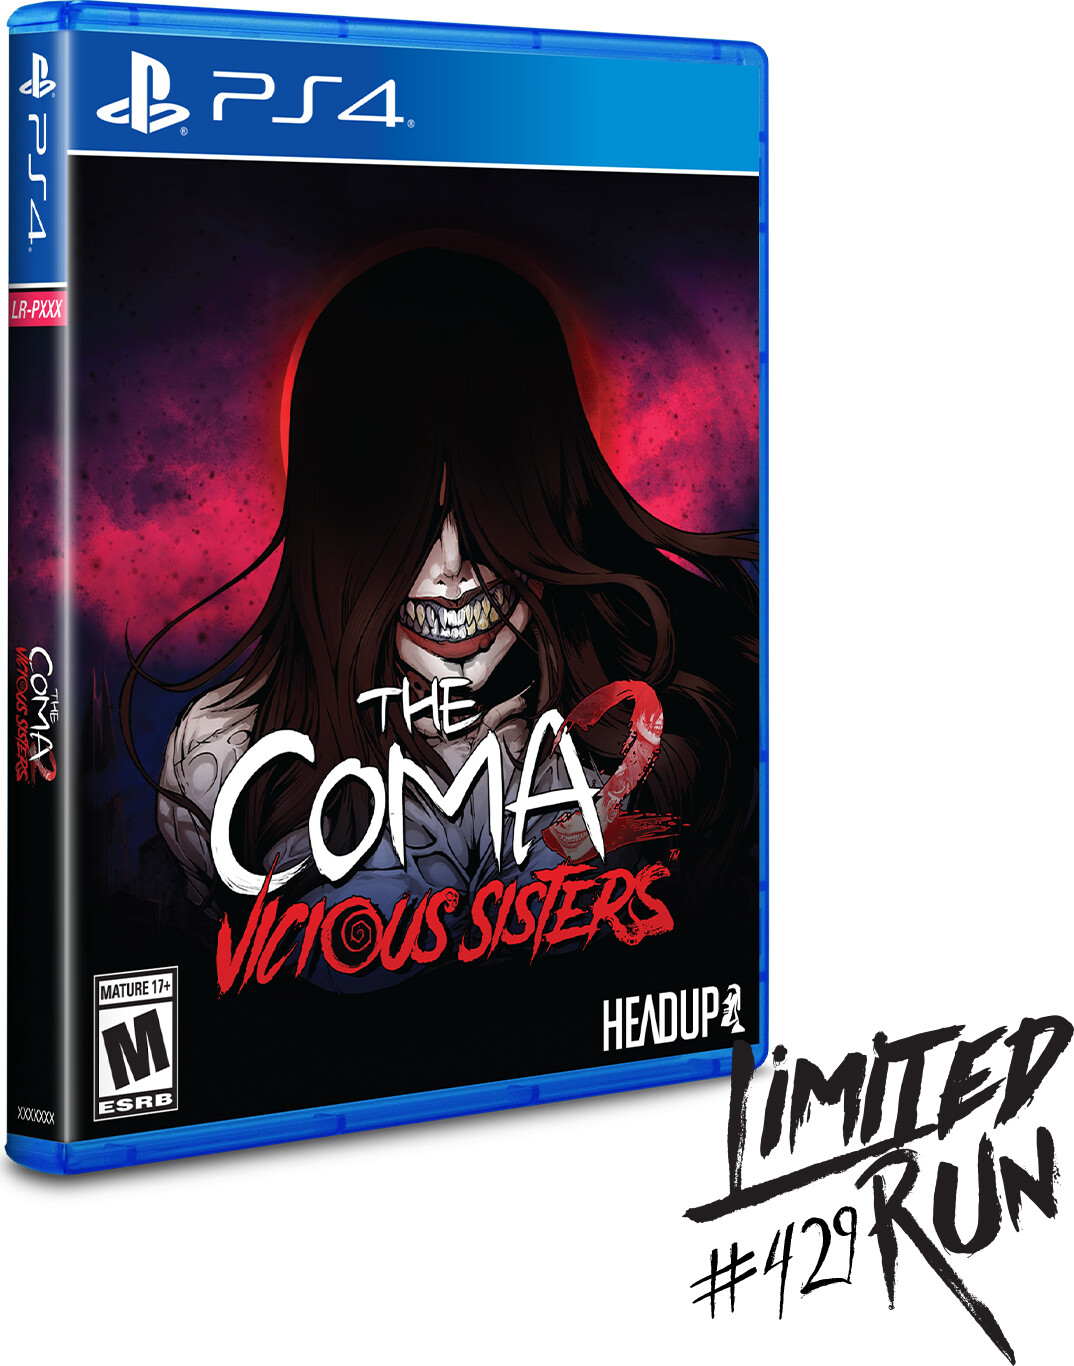 Se The Coma 2: Vicious Sisters (limited Run #429) (import) - PS4 hos Gucca.dk